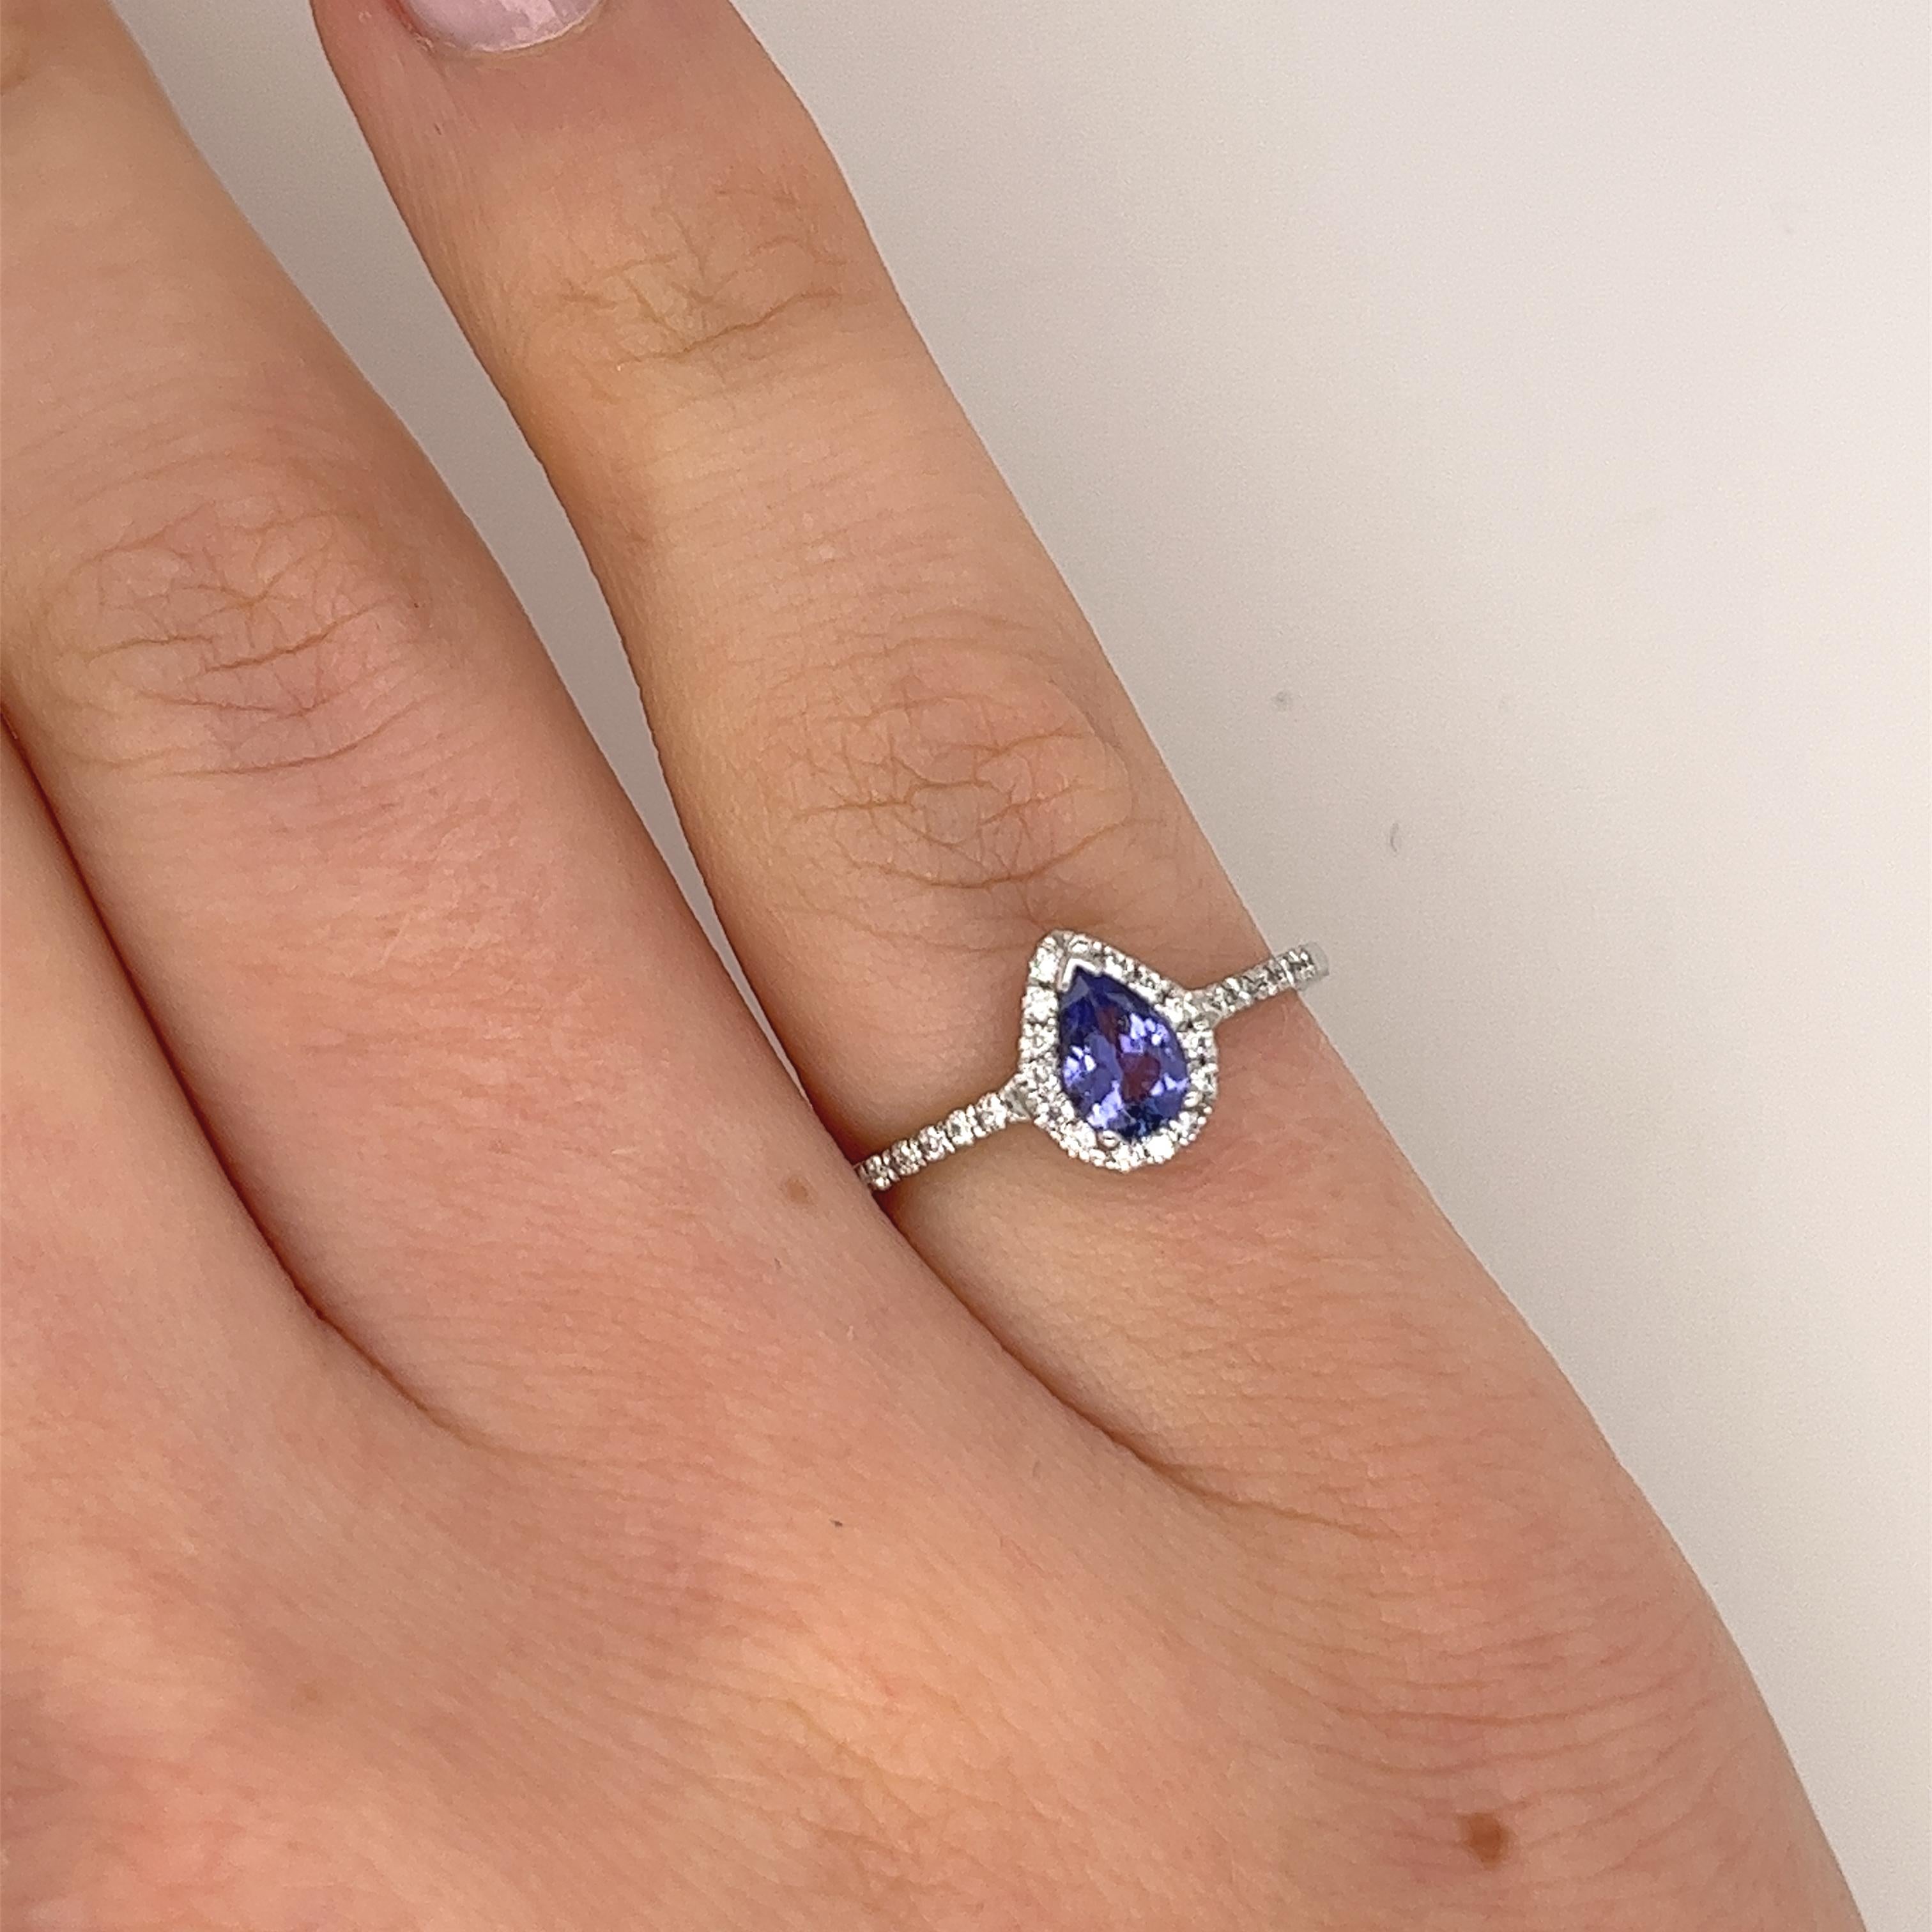 Tanzanite and diamond ring set with 0.40ct pear shape tanzanite and small diamonds on the halo and shoulders,total diamond weight is 0.15ct set in 18ct white gold setting.

Total Weight: 2.1g
Ring Size: J
Width of Band: 1.3mm
Width of Head: